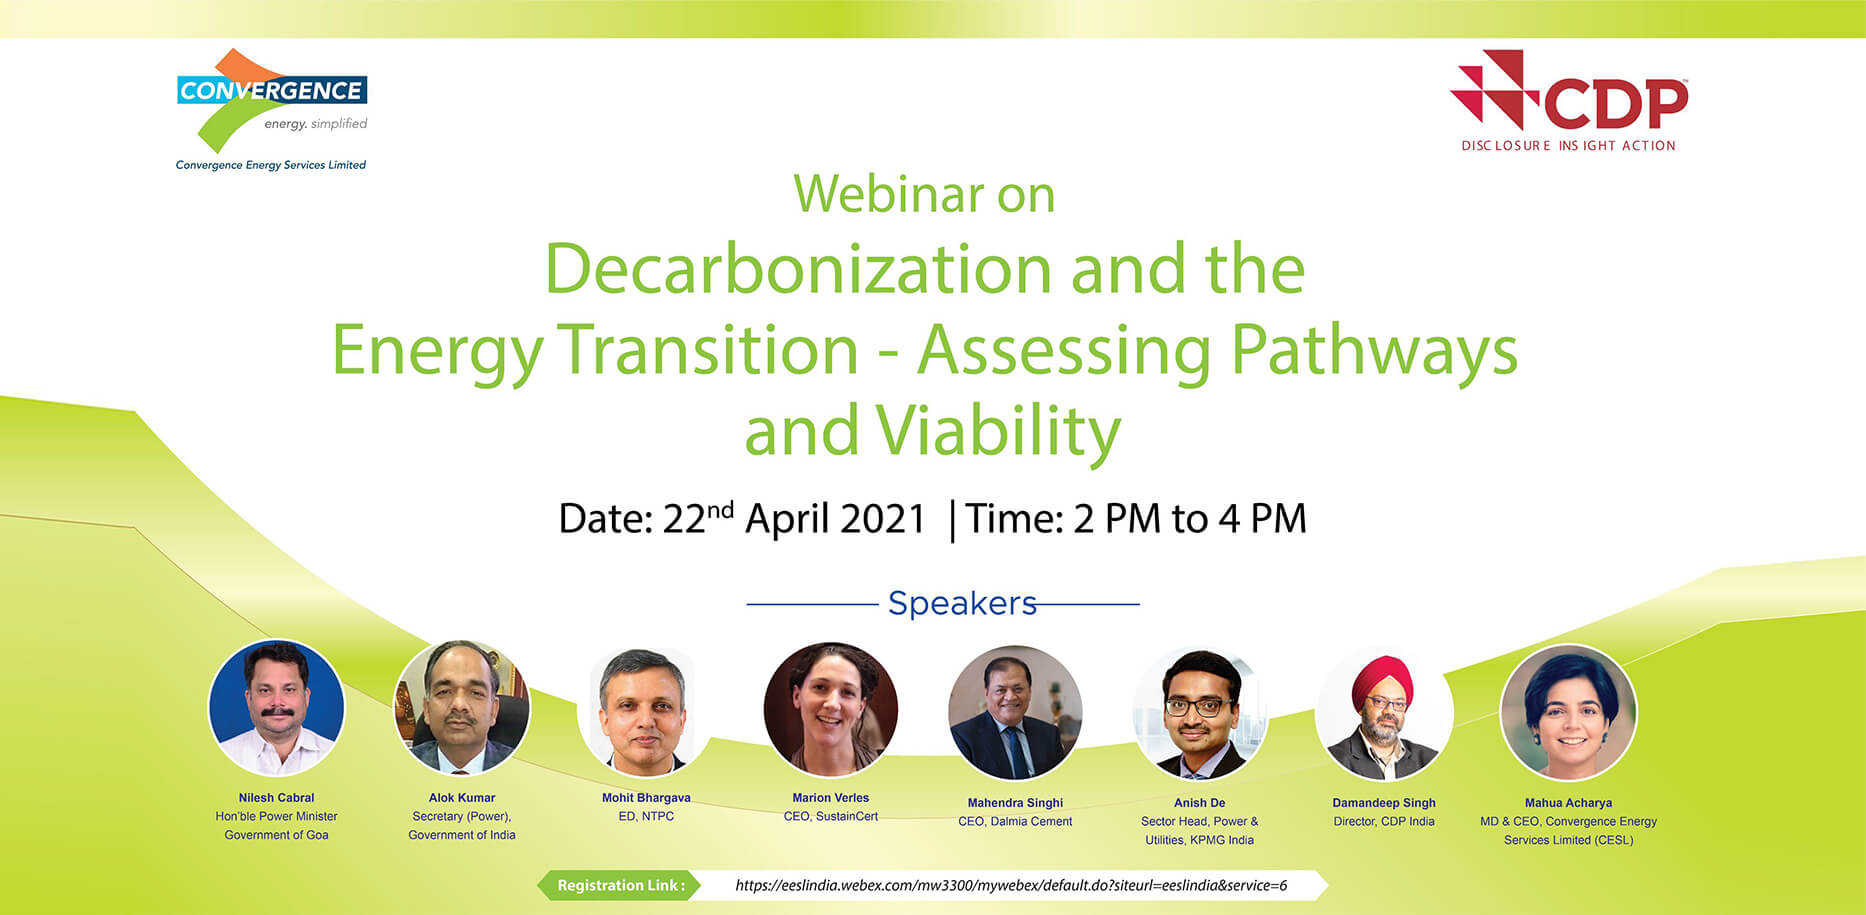 Webinar On Decarbonization and the Energy Transition - Assessing Pathways and Viability